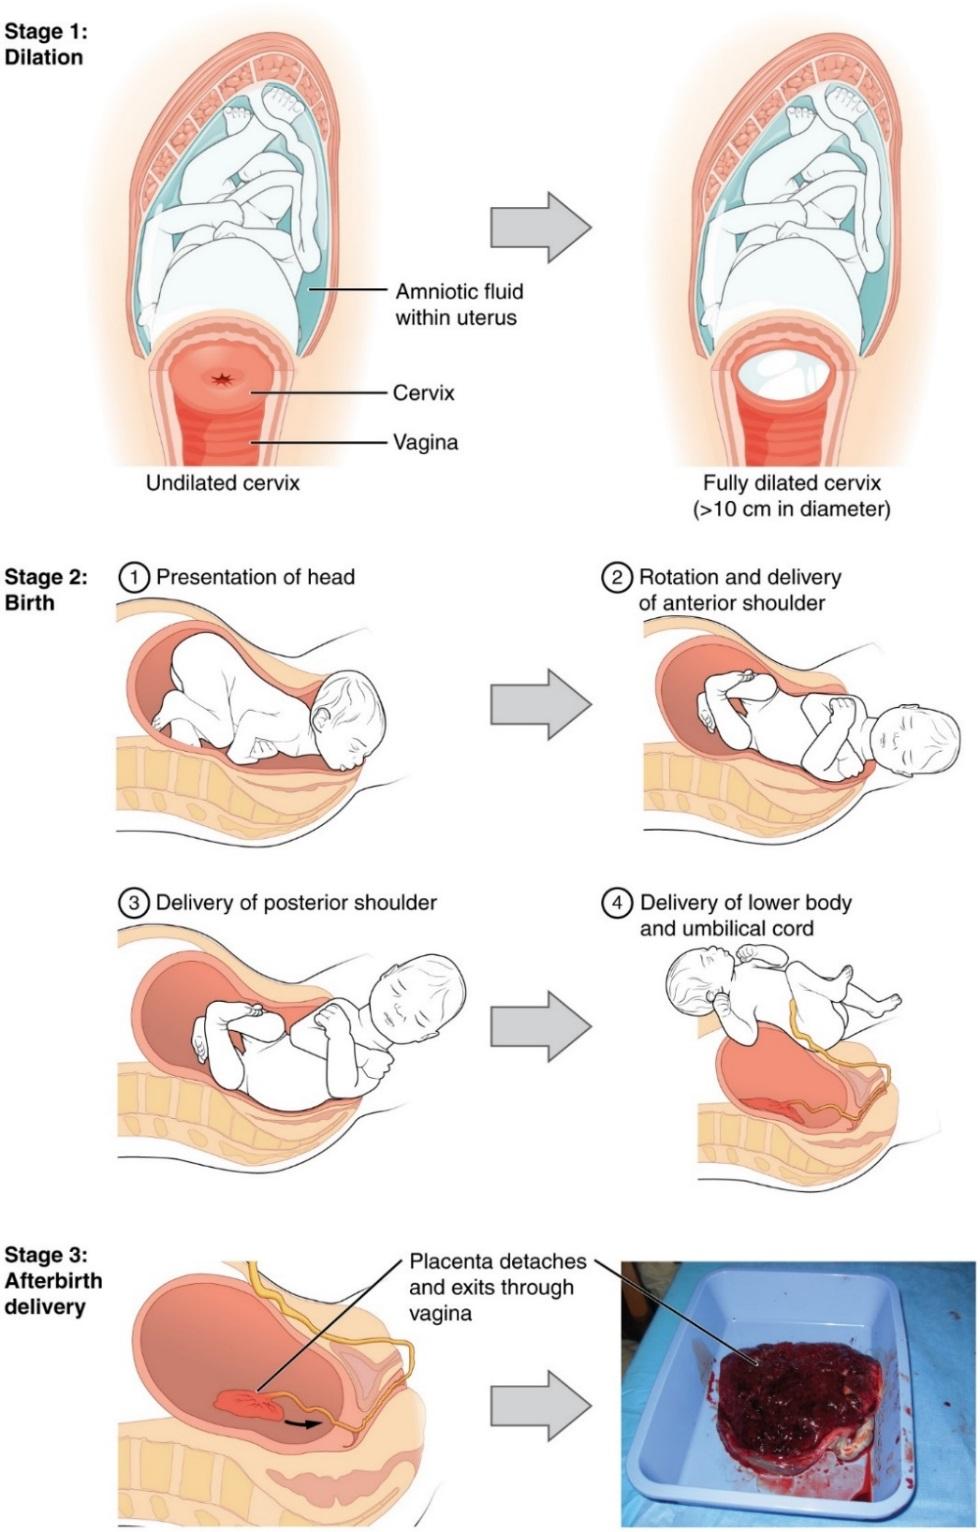 Stage 2, full dilation and expulsion of the newborn